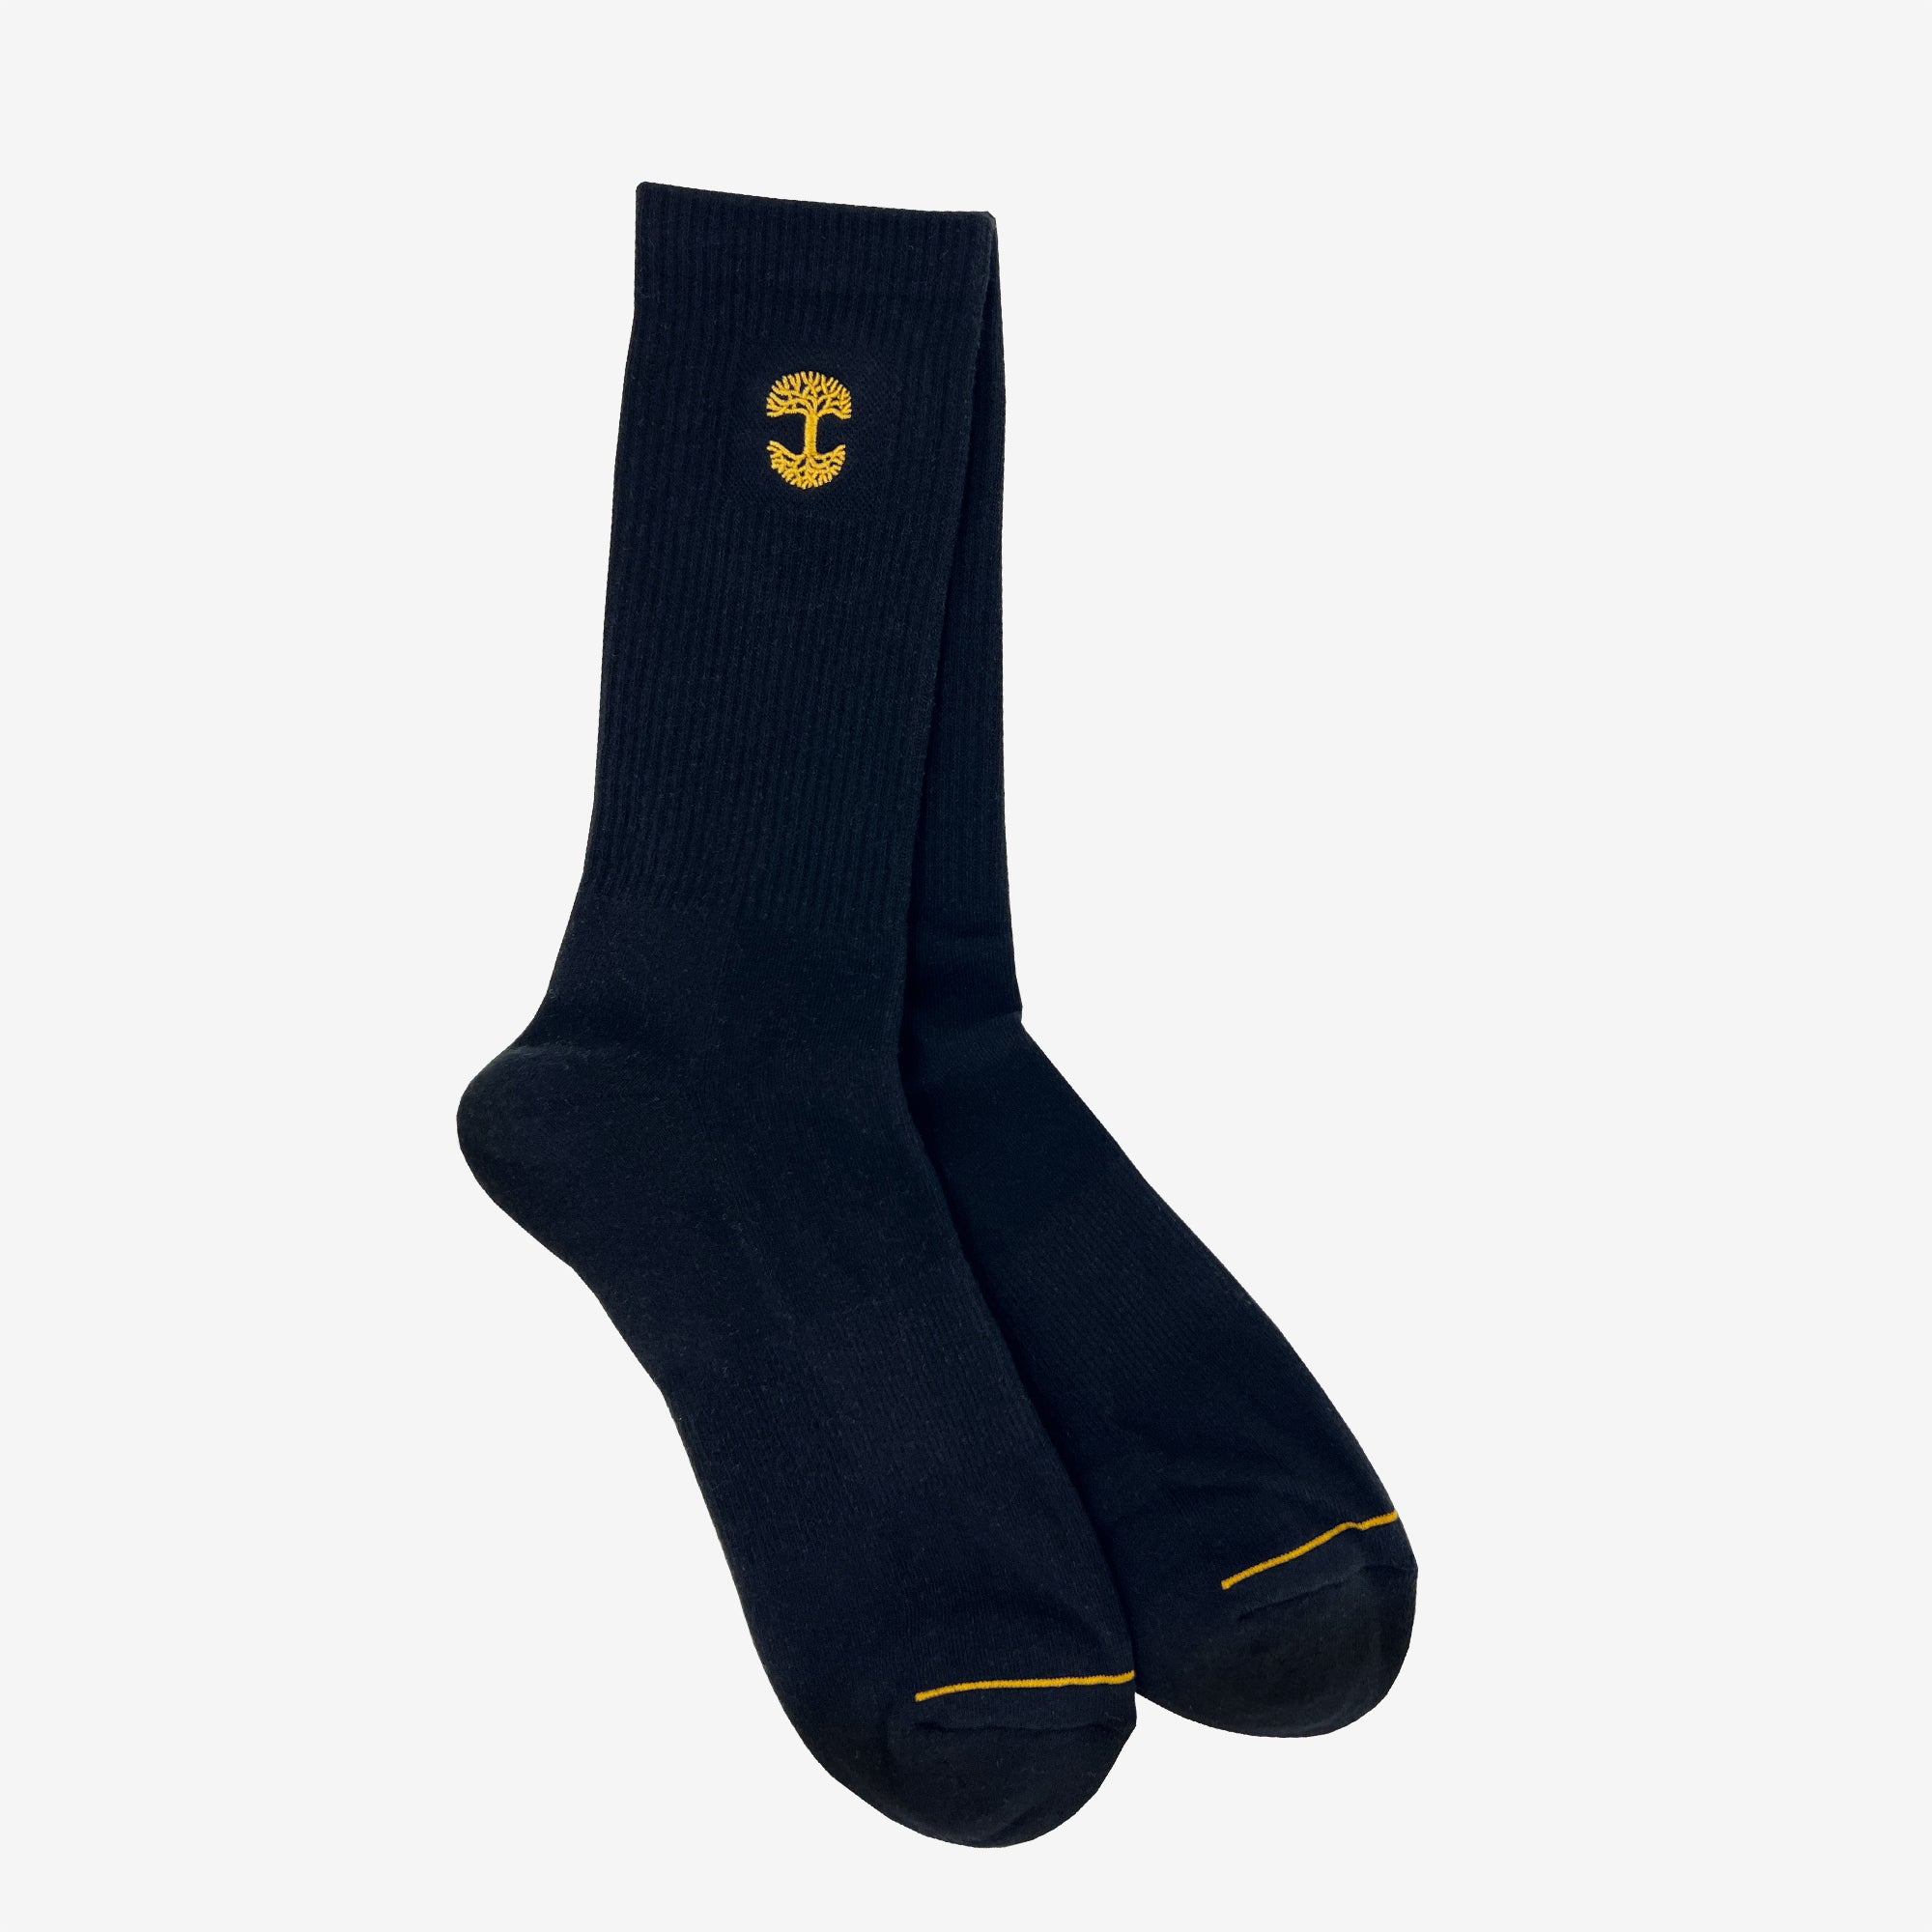 Two nestled high-cut black crew socks with an embroidered gold Oaklandish logo at the top.